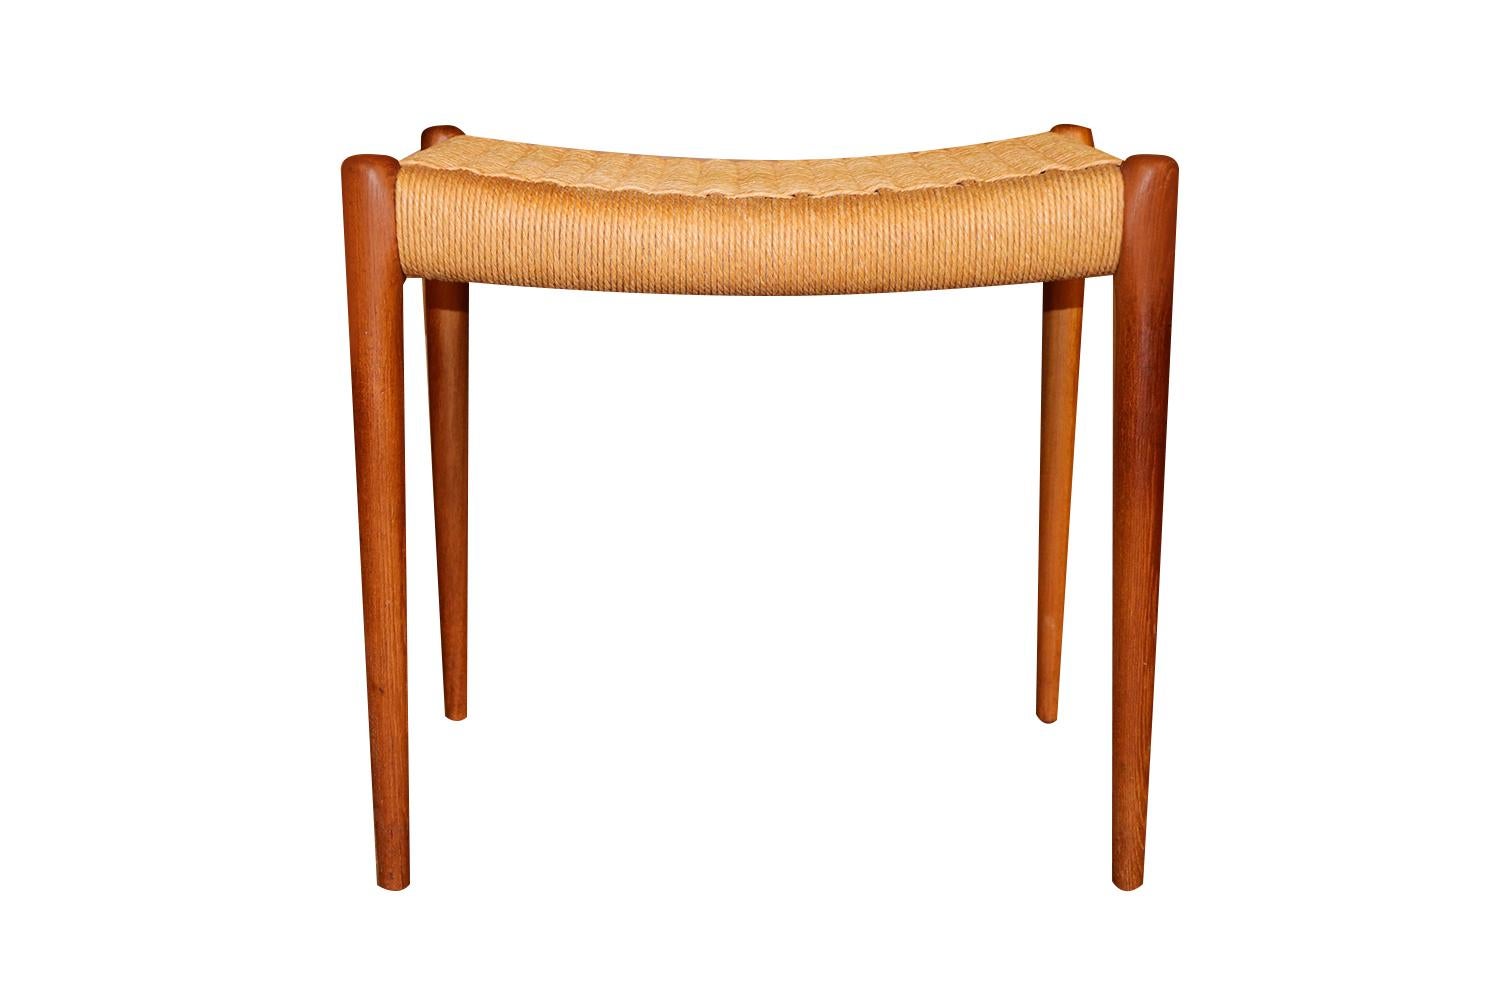 An absolutely stunning teak Danish Cord ottoman, bench model 80A designed in 1963 by Niels Otto Møller for J.L. Møllers Møbelfabrik in Denmark. Makers Stamp (Møller Furniture Maker) underneath ottoman. This gorgeous ottoman, crafted in solid teak,